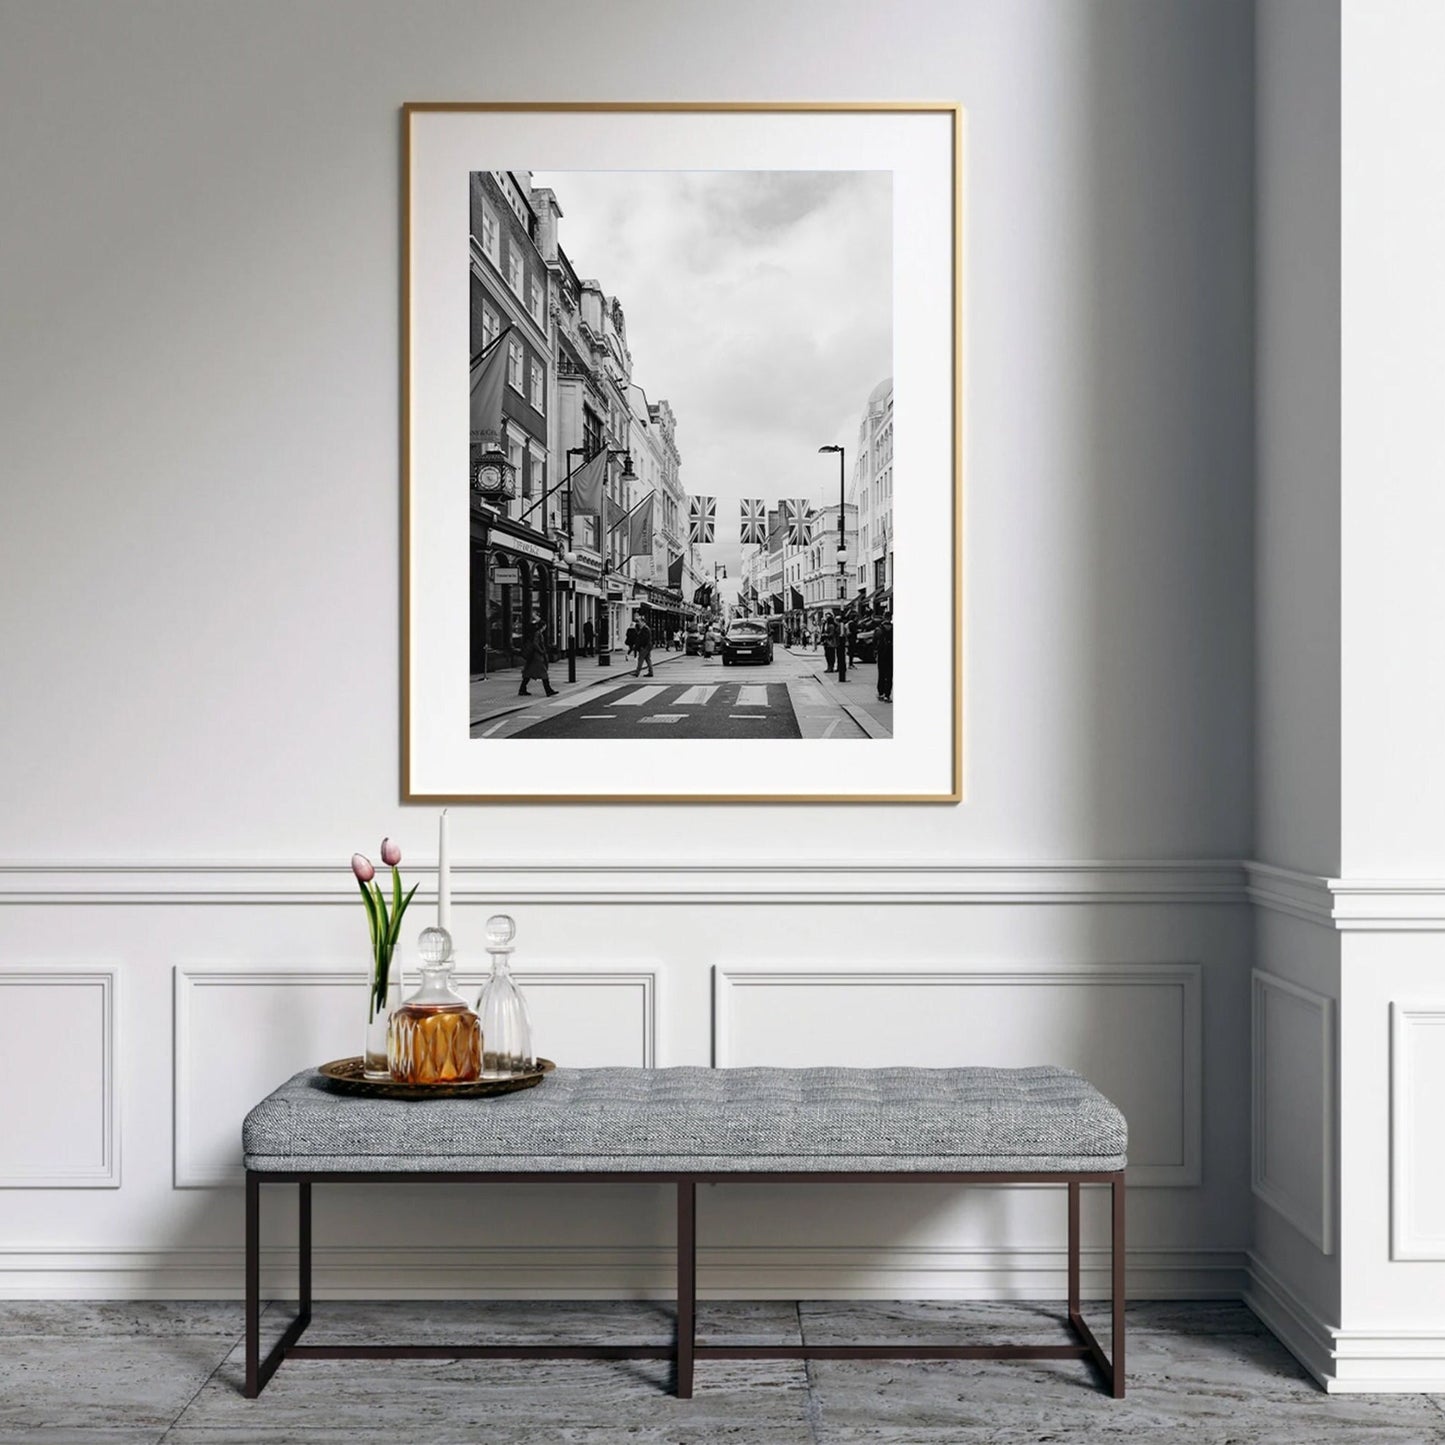 Black and White Photograph of Mayfair London, Monochrome London Street Scene Photo, Timeless UK Busy Street Photo, Classic Streets of London